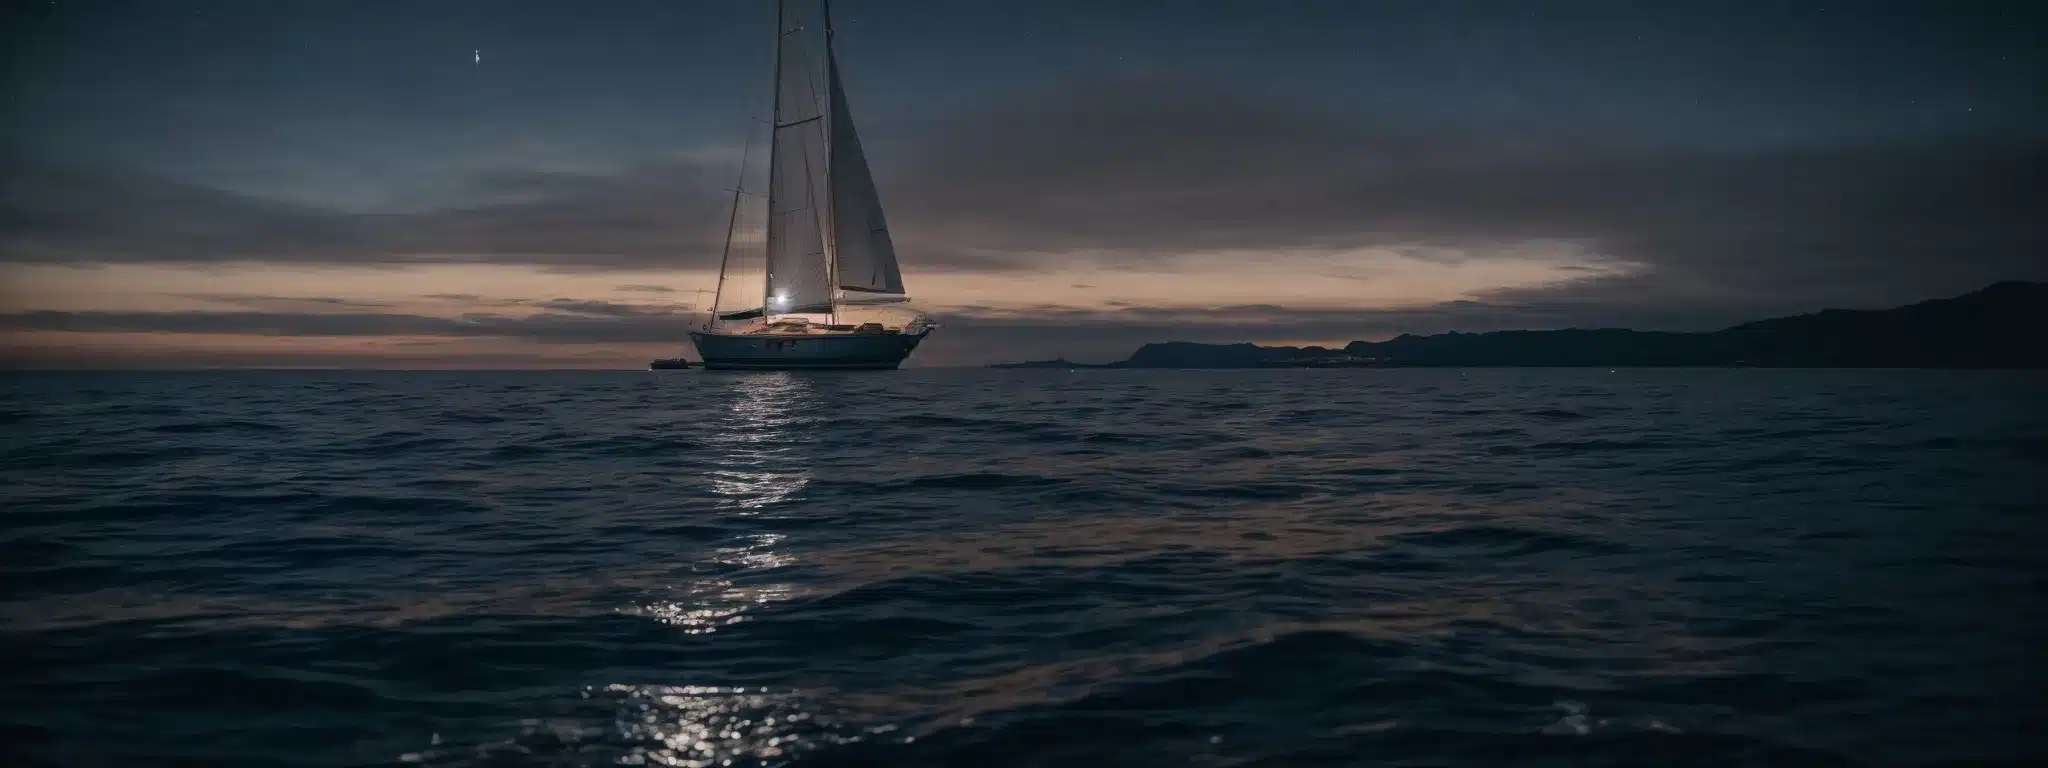 A Sailboat Voyaging On The Open Sea Under A Star-Lit Sky.